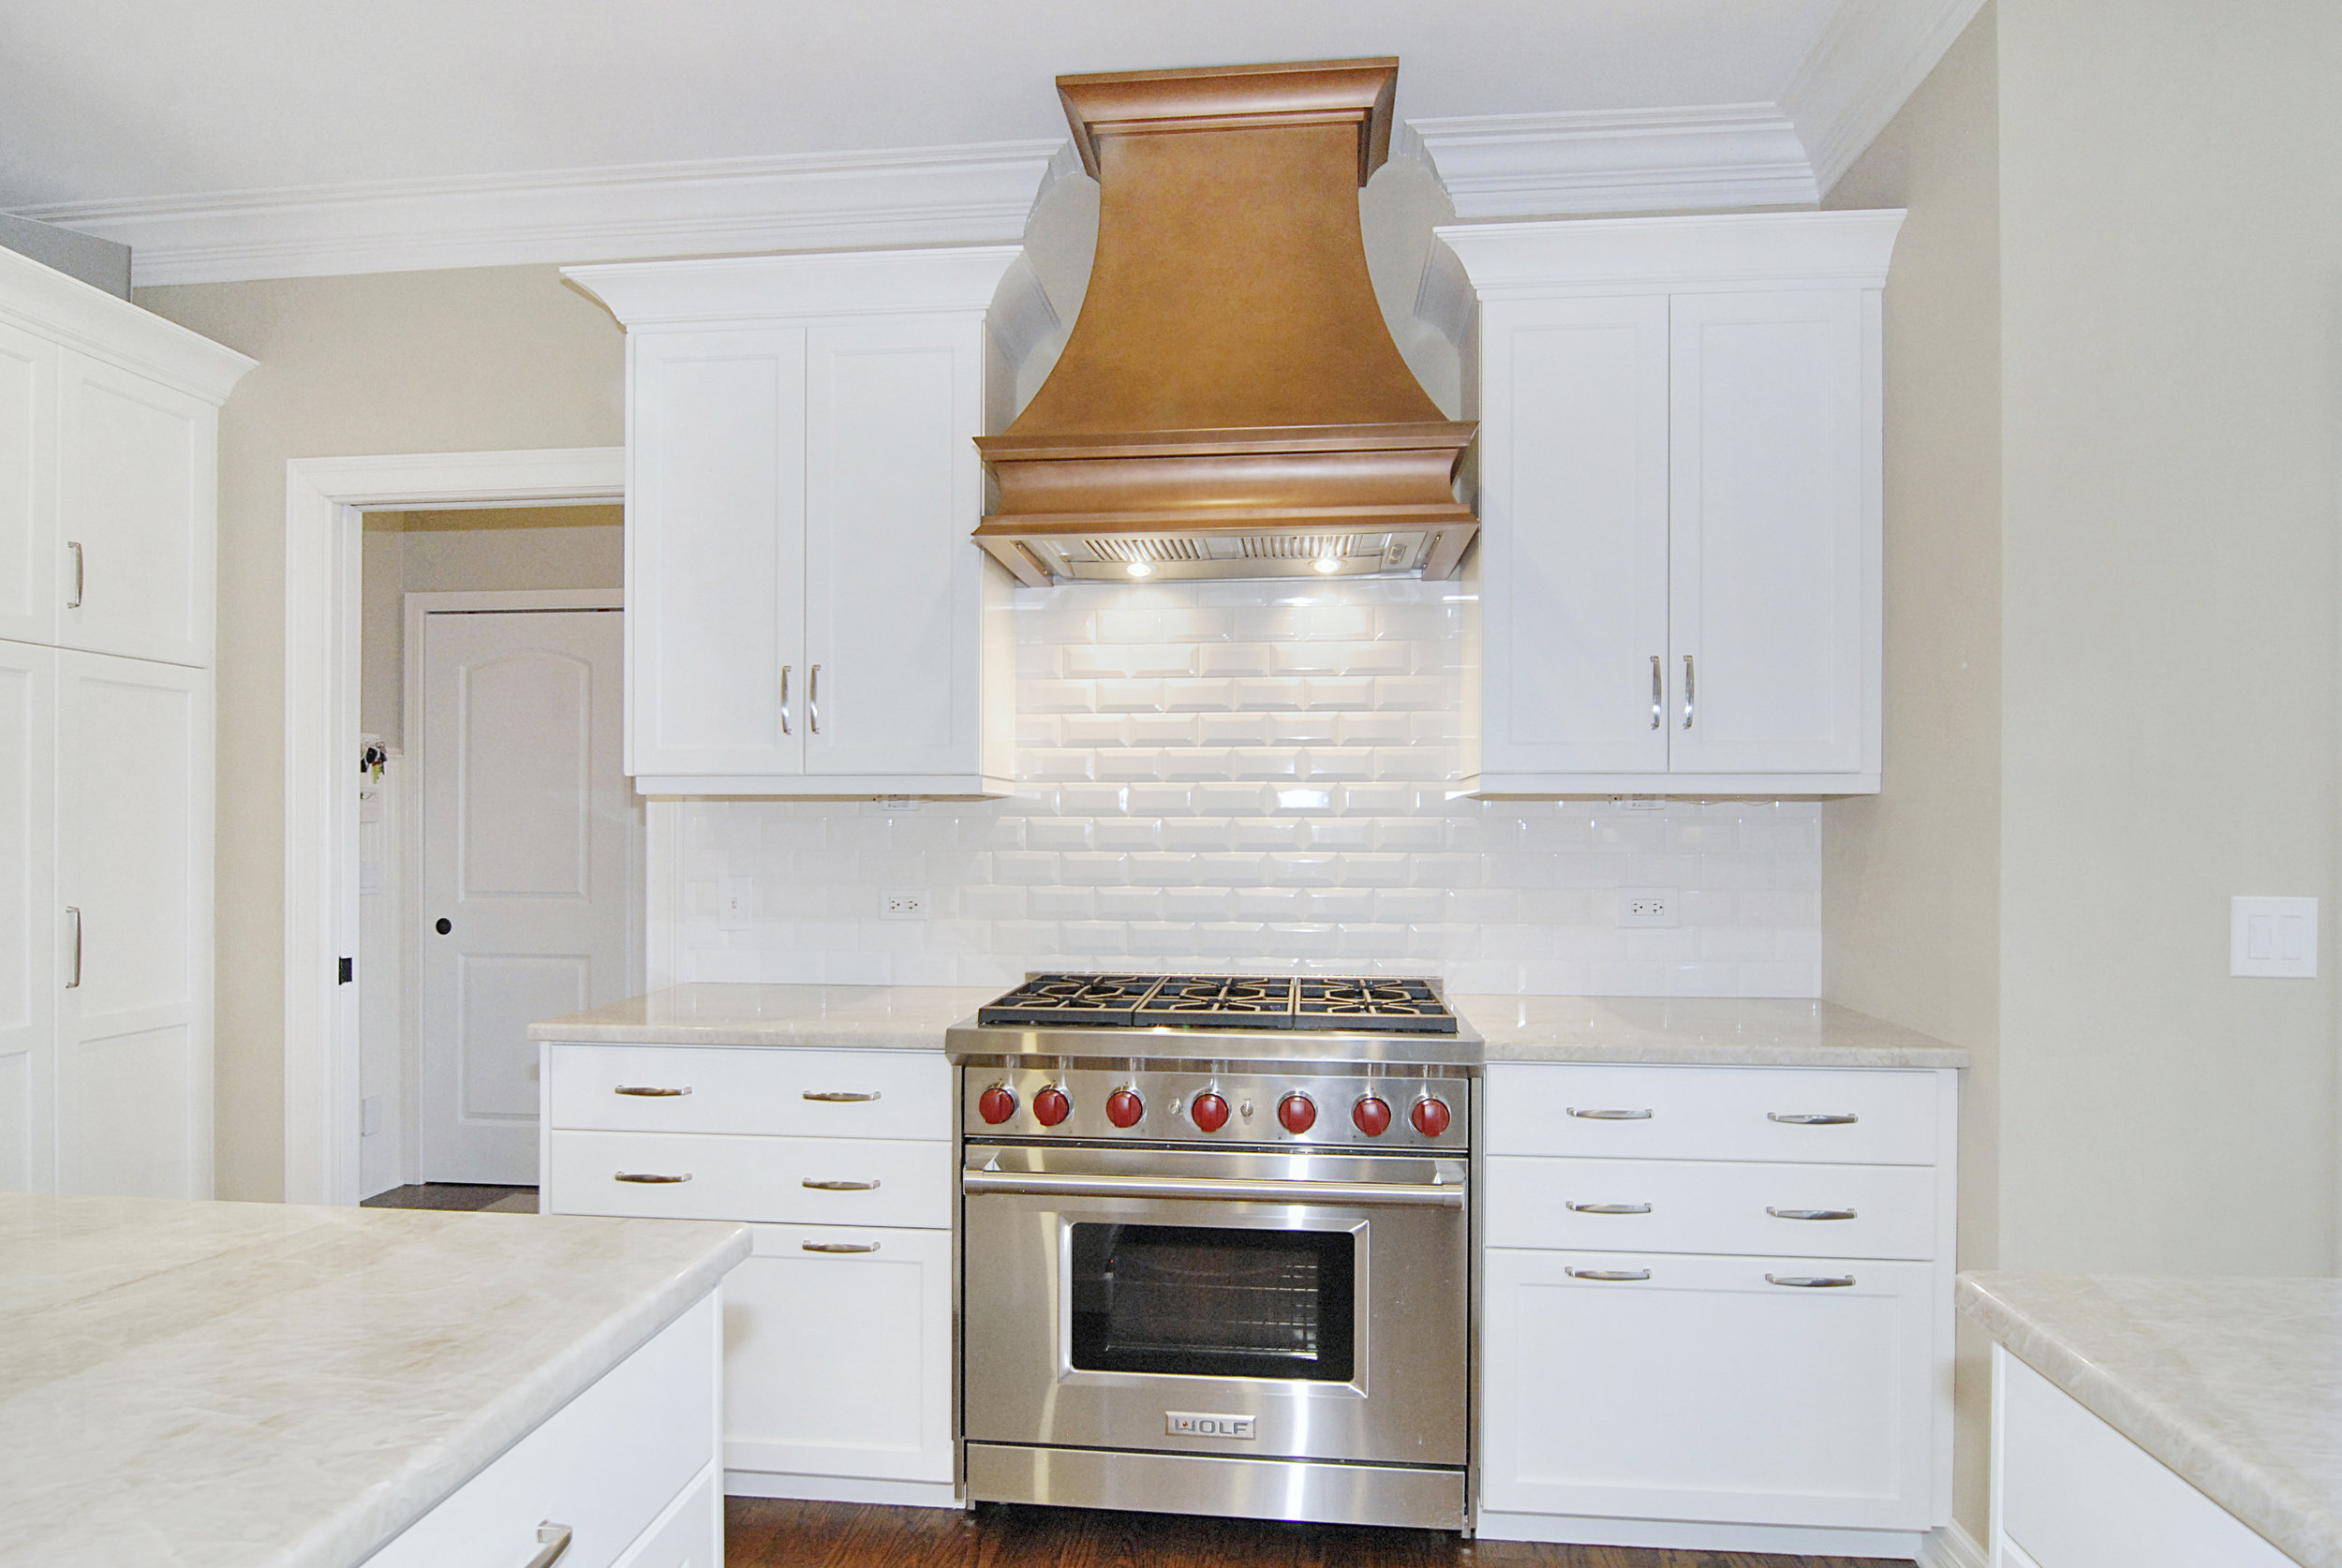 NAPERVIILLE IL KITCHEN HOOD REMODEL WITH COPPER HAMMERED HOOD